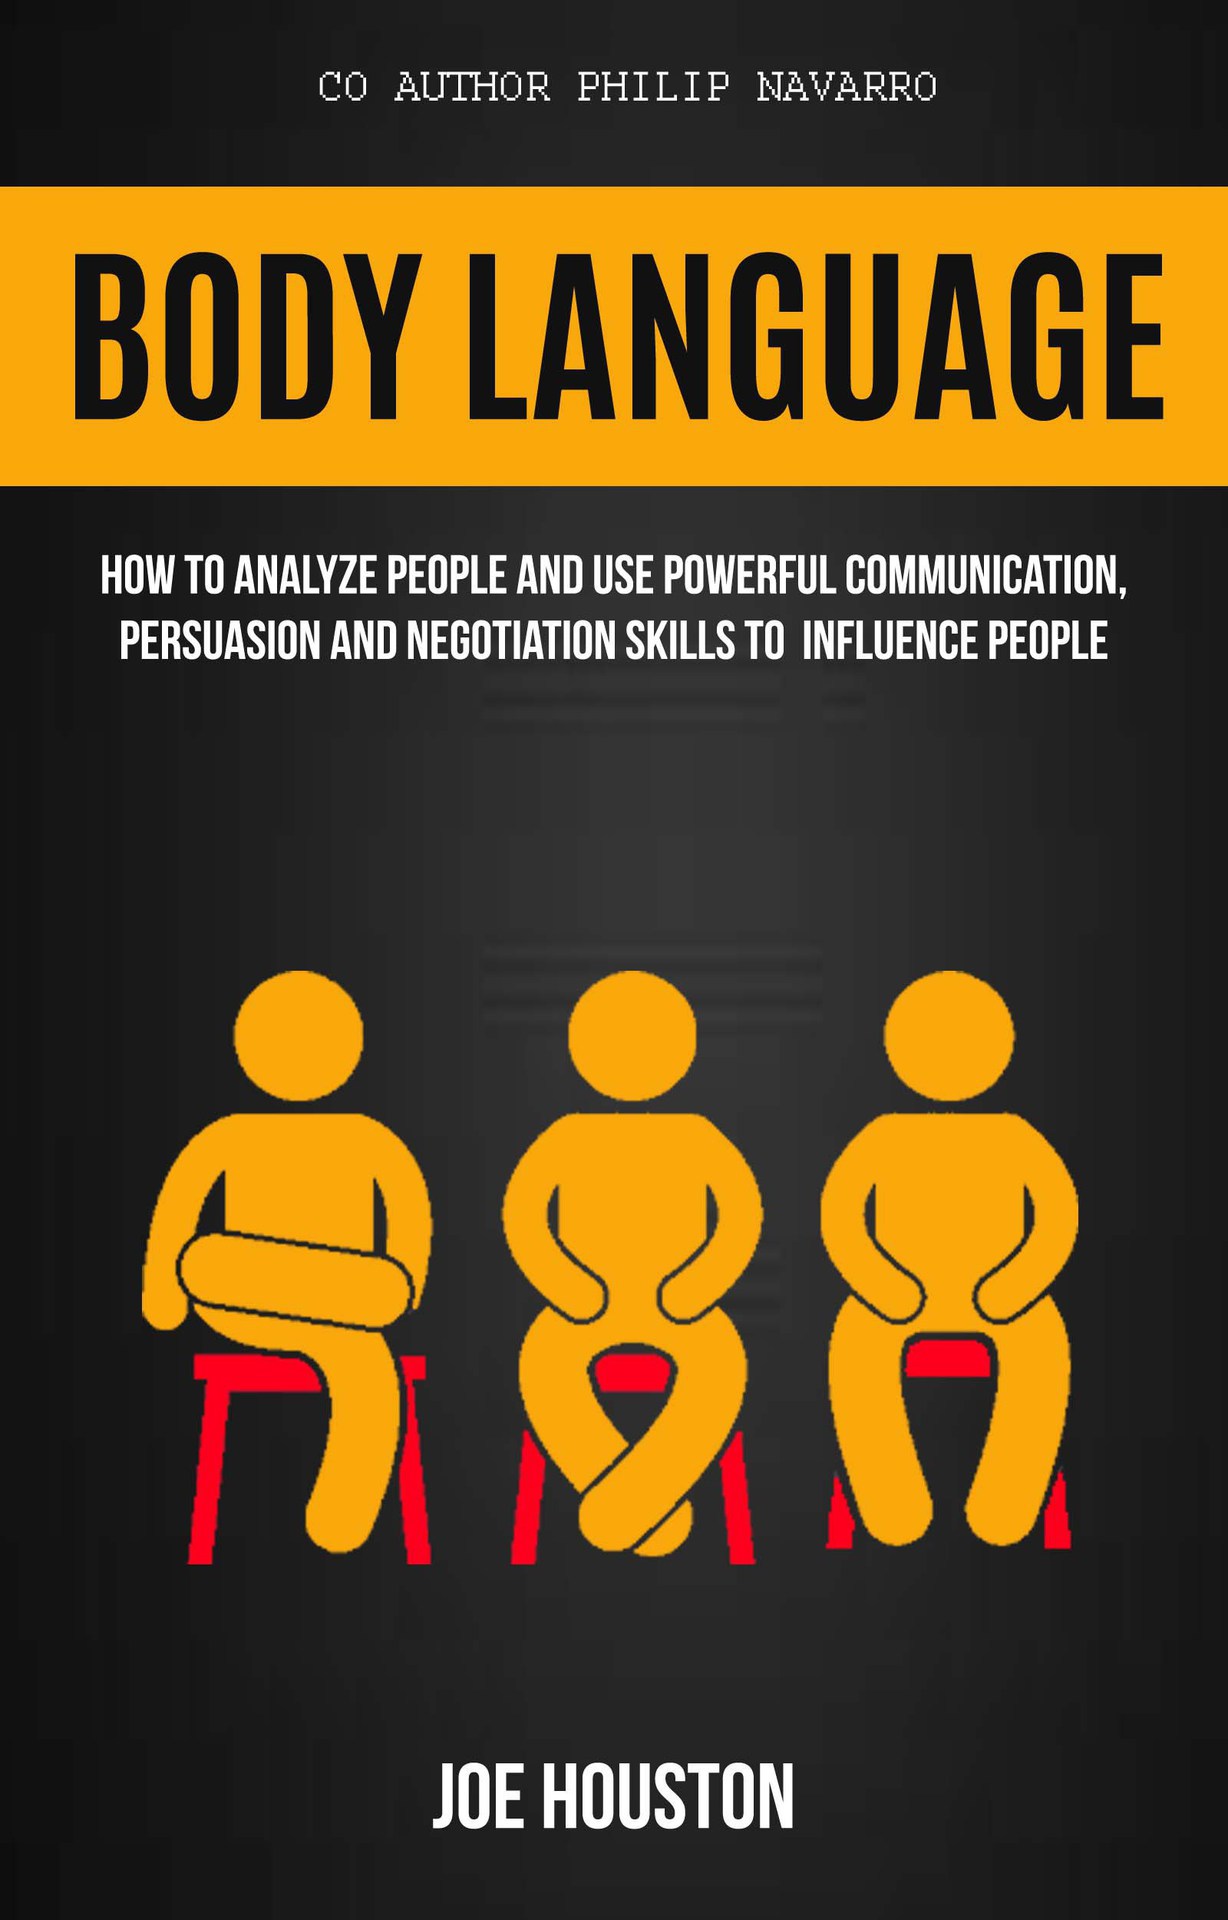 Body Language: How To Analyze People And Use Powerful Communication, Persuasion And Negotiation Skills To Influence People